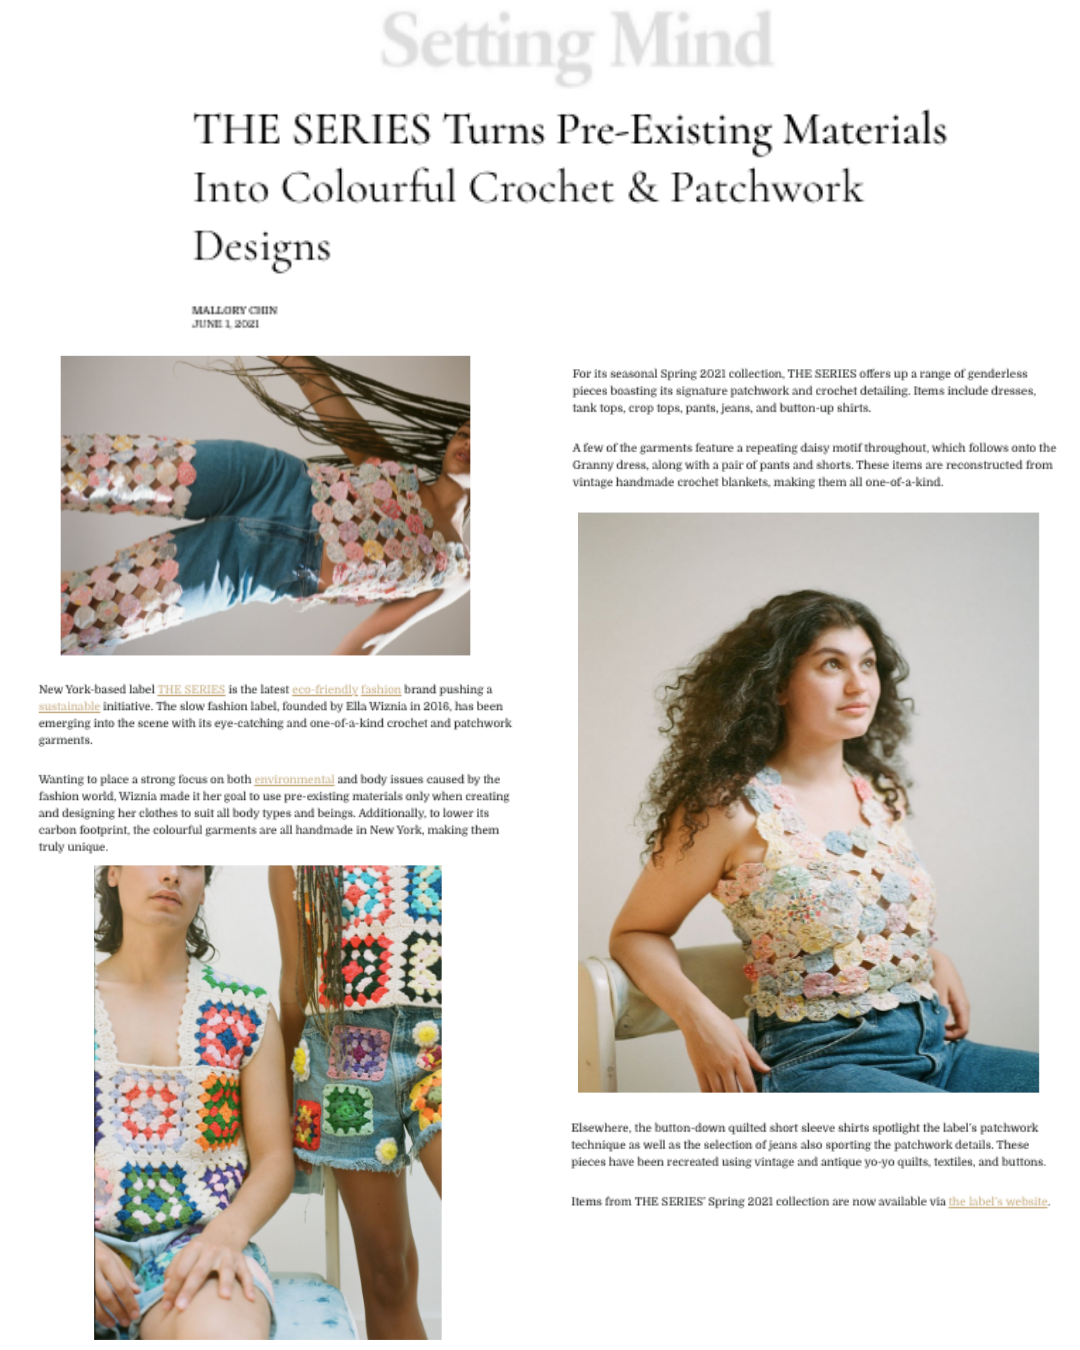 Setting Mind | THE SERIES Turns Pre-Existing Materials Into Colourful Crochet & Patchwork Designs